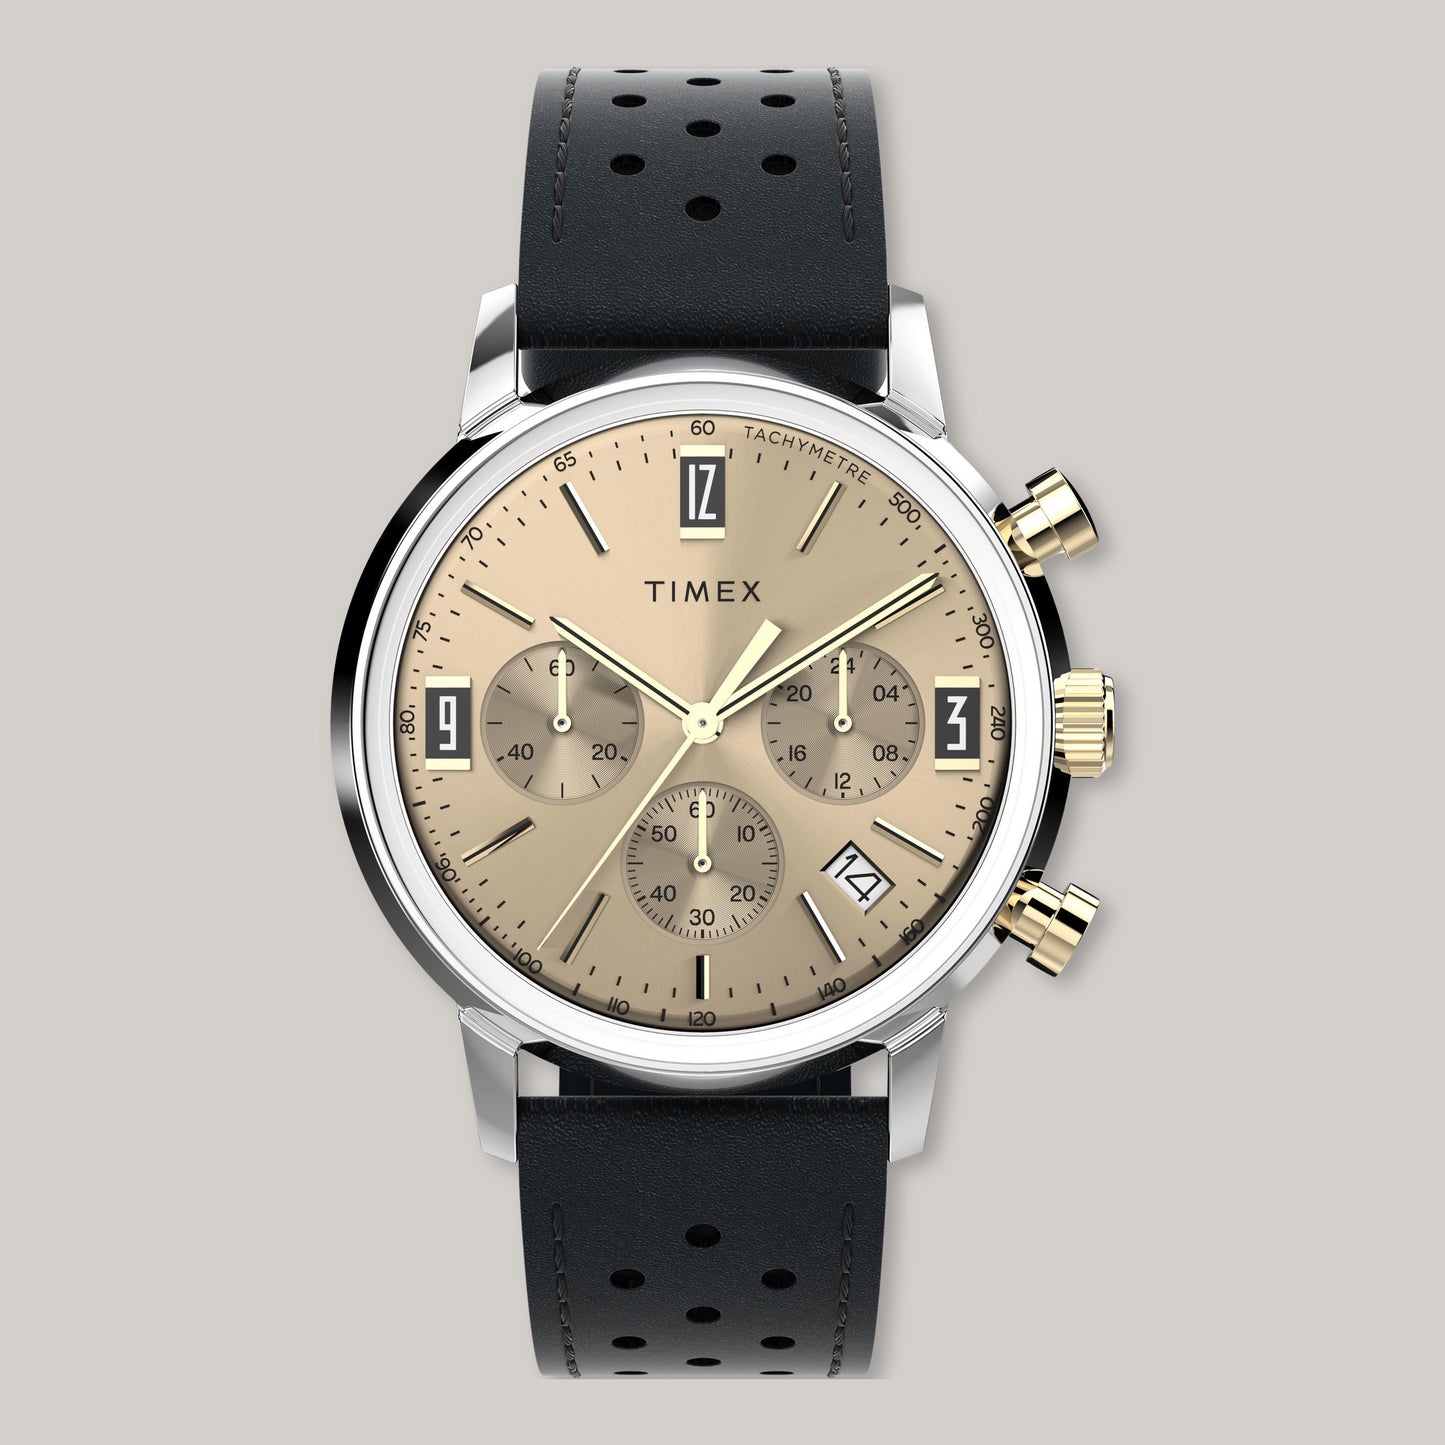 TIMEX MARLIN CHRONOGRAPH 40MM BRONZE DIAL - BROWN LEATHER